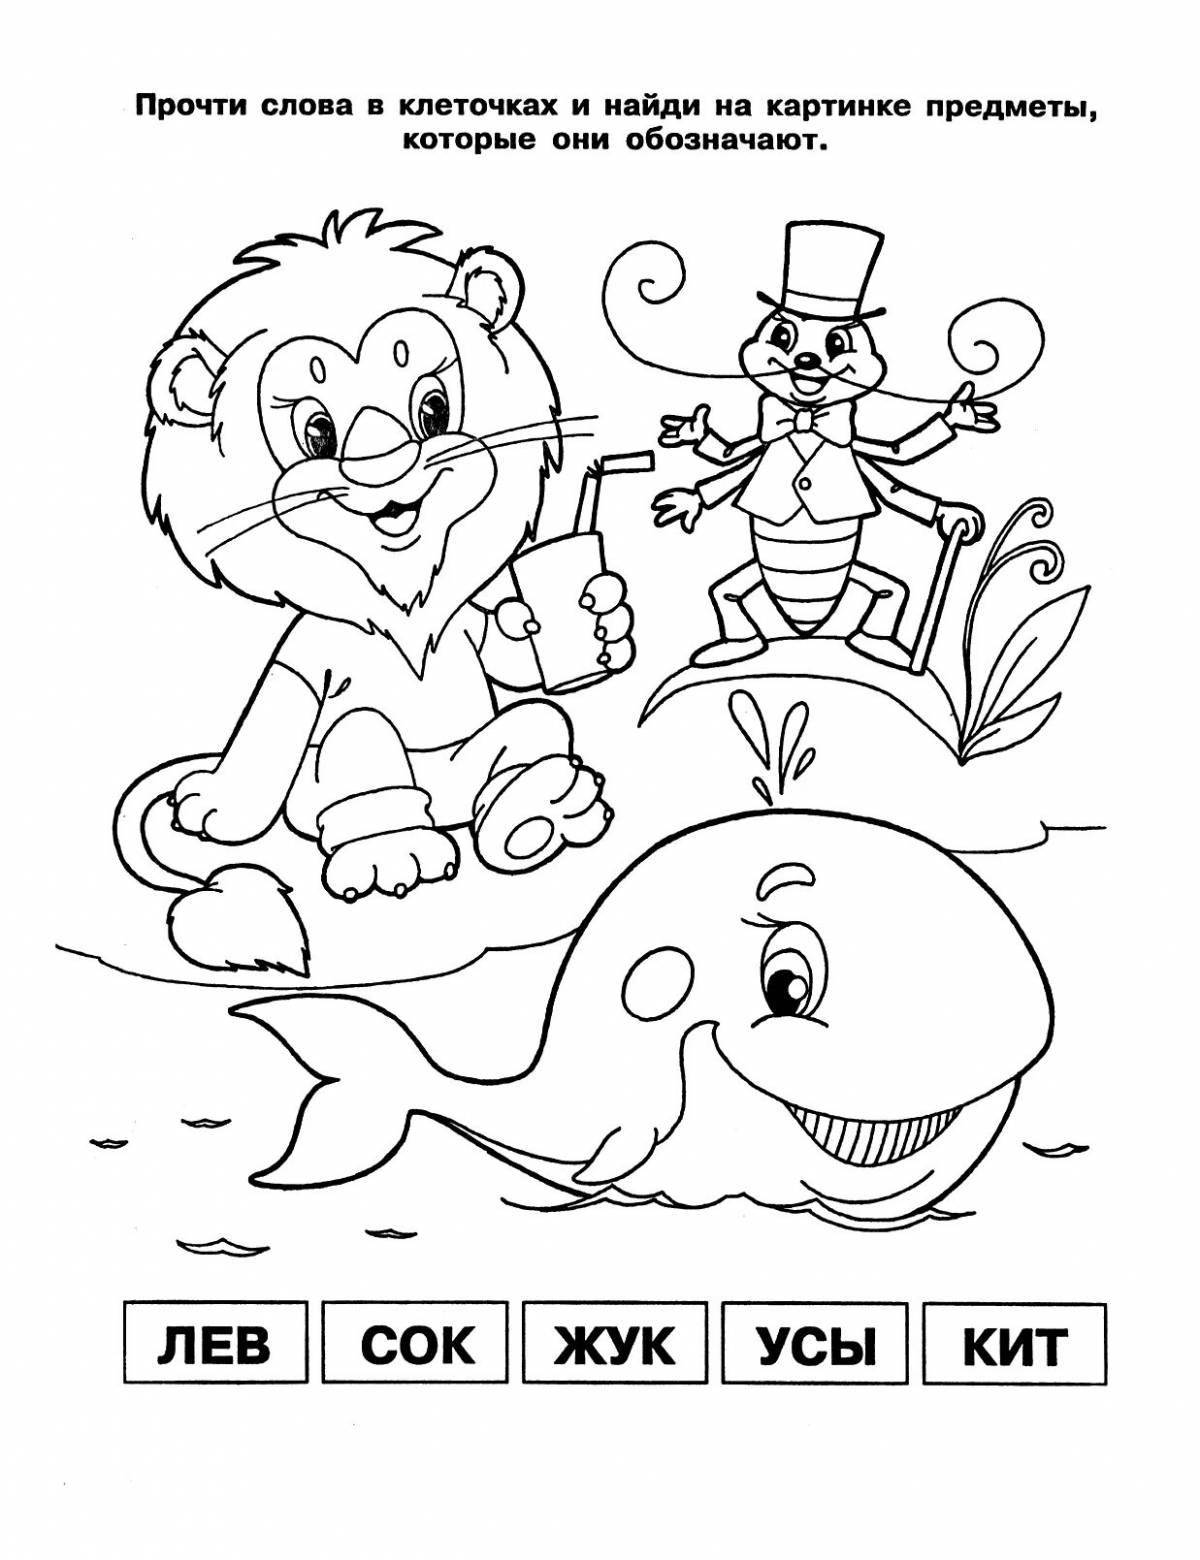 Fun coloring book with letters for children 5-6 years old